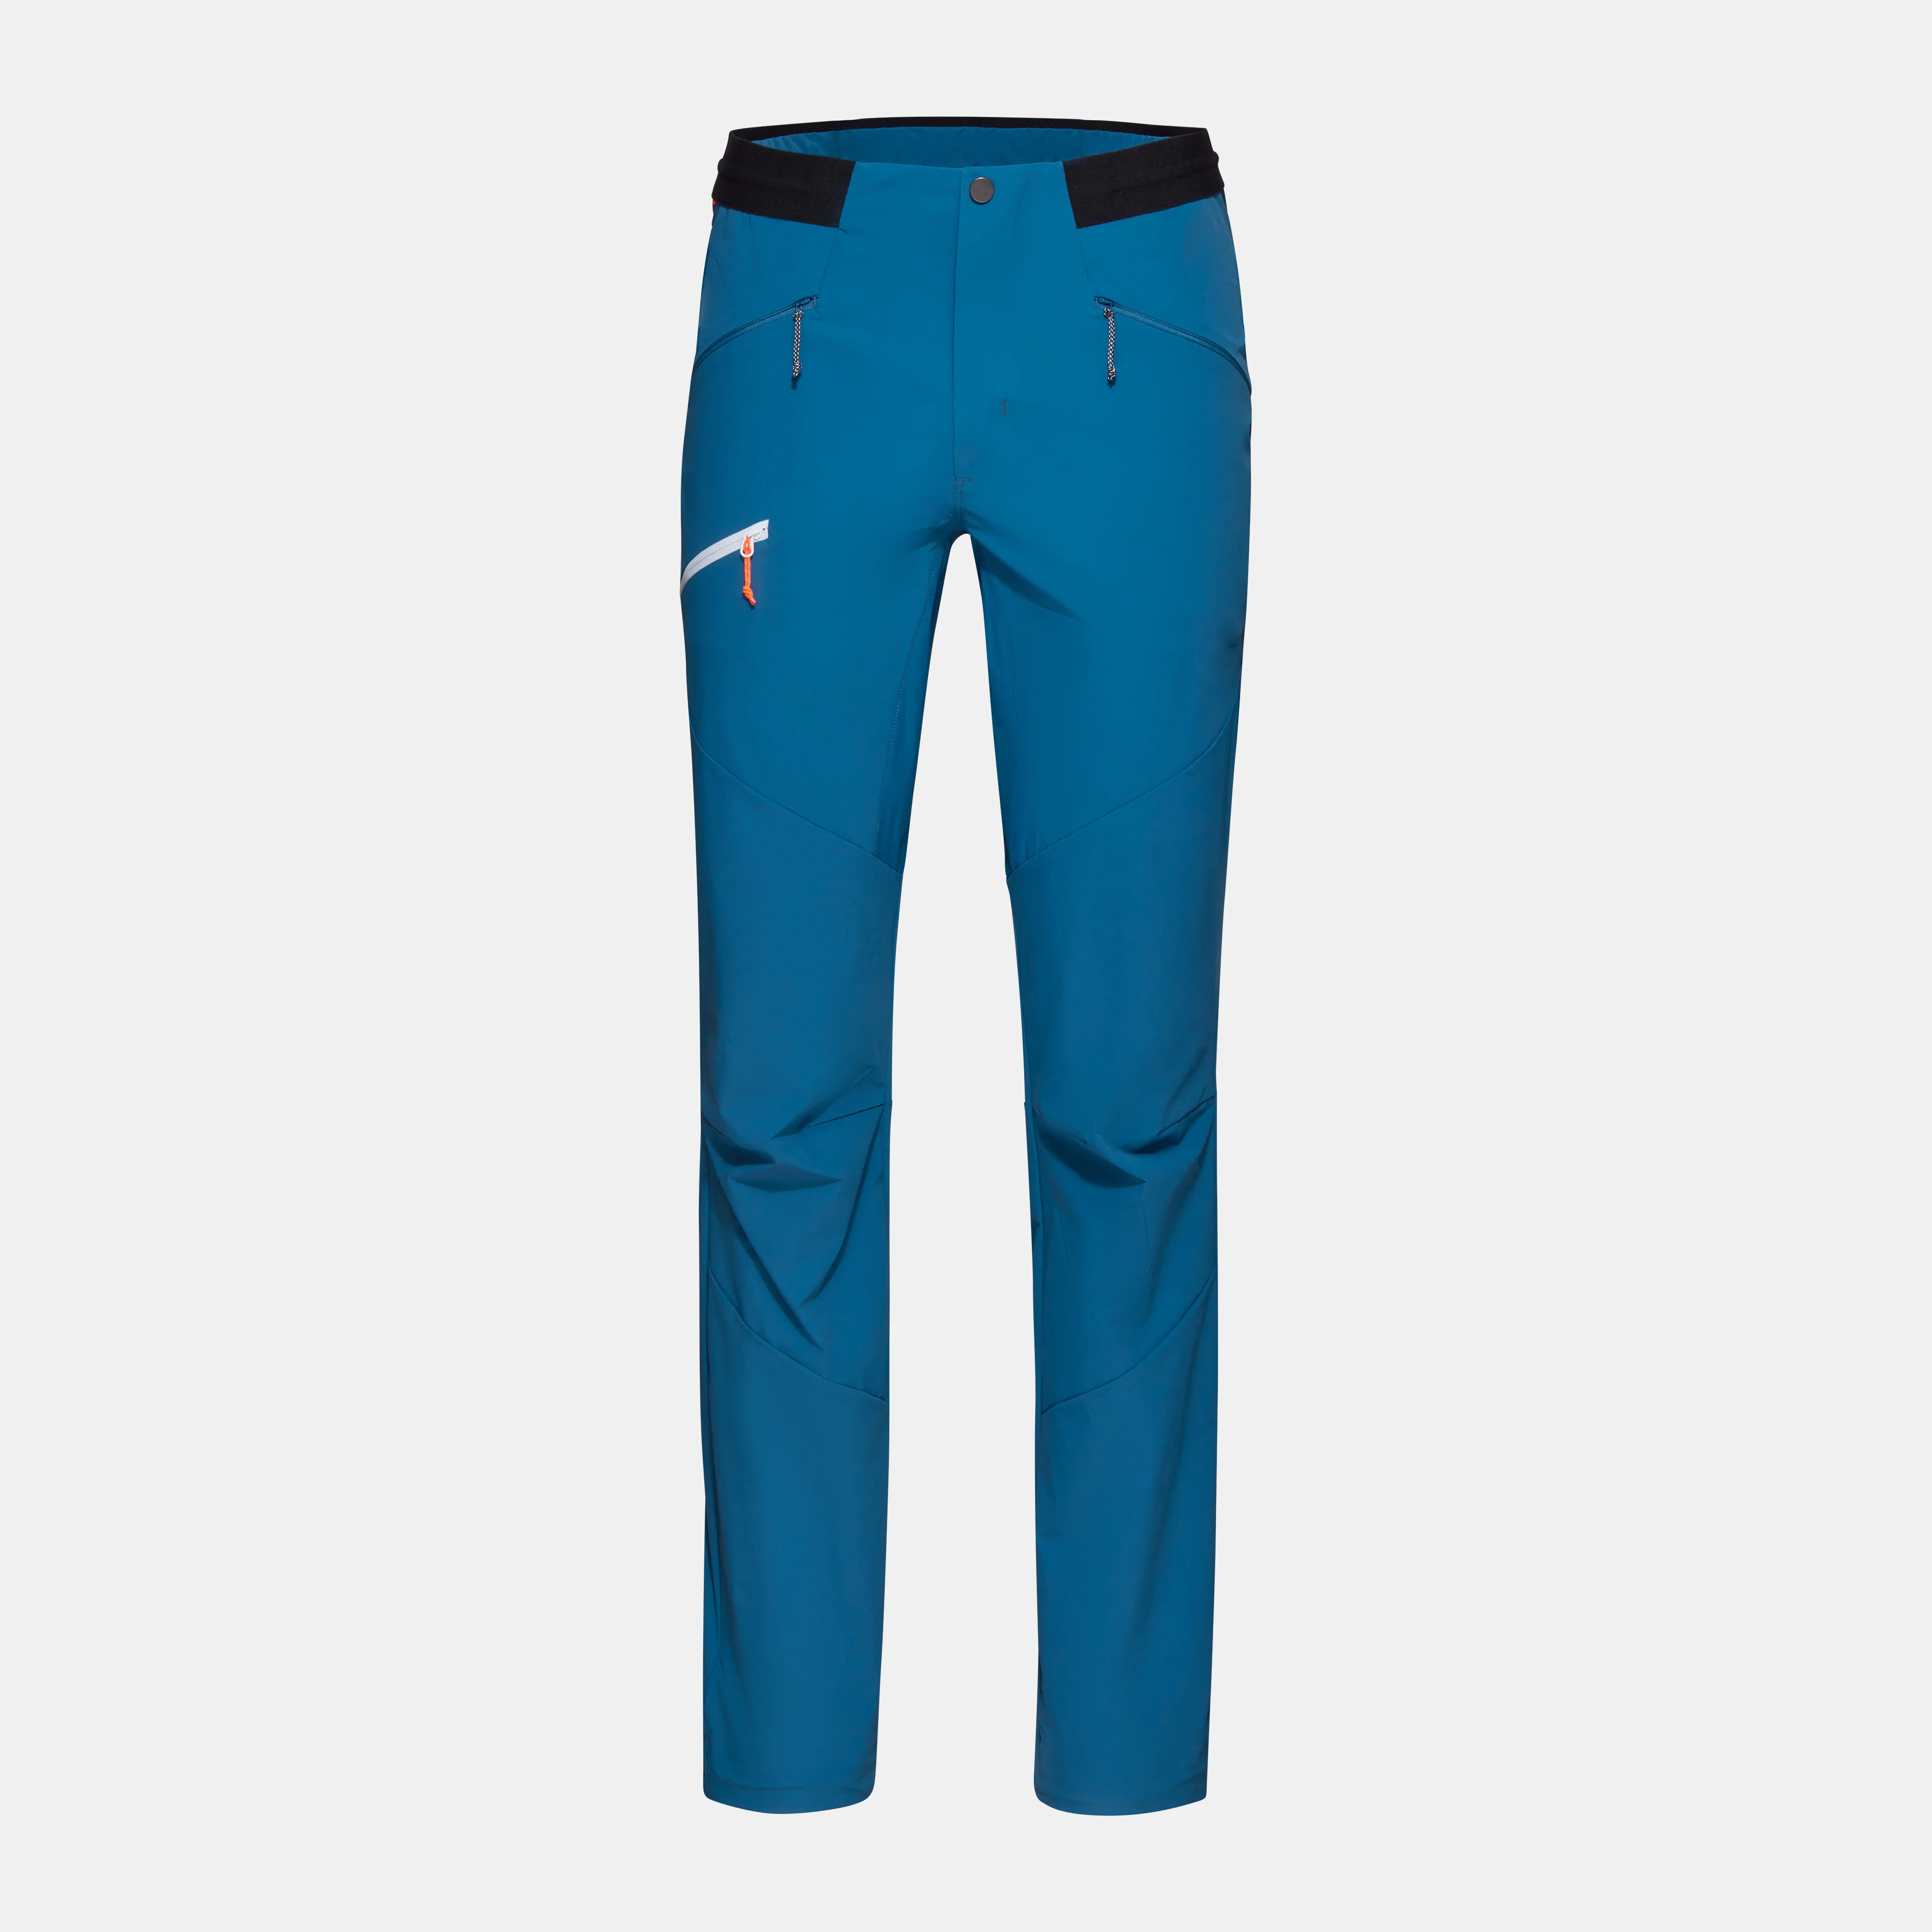 Mens Ultra-light and durable softshell pants